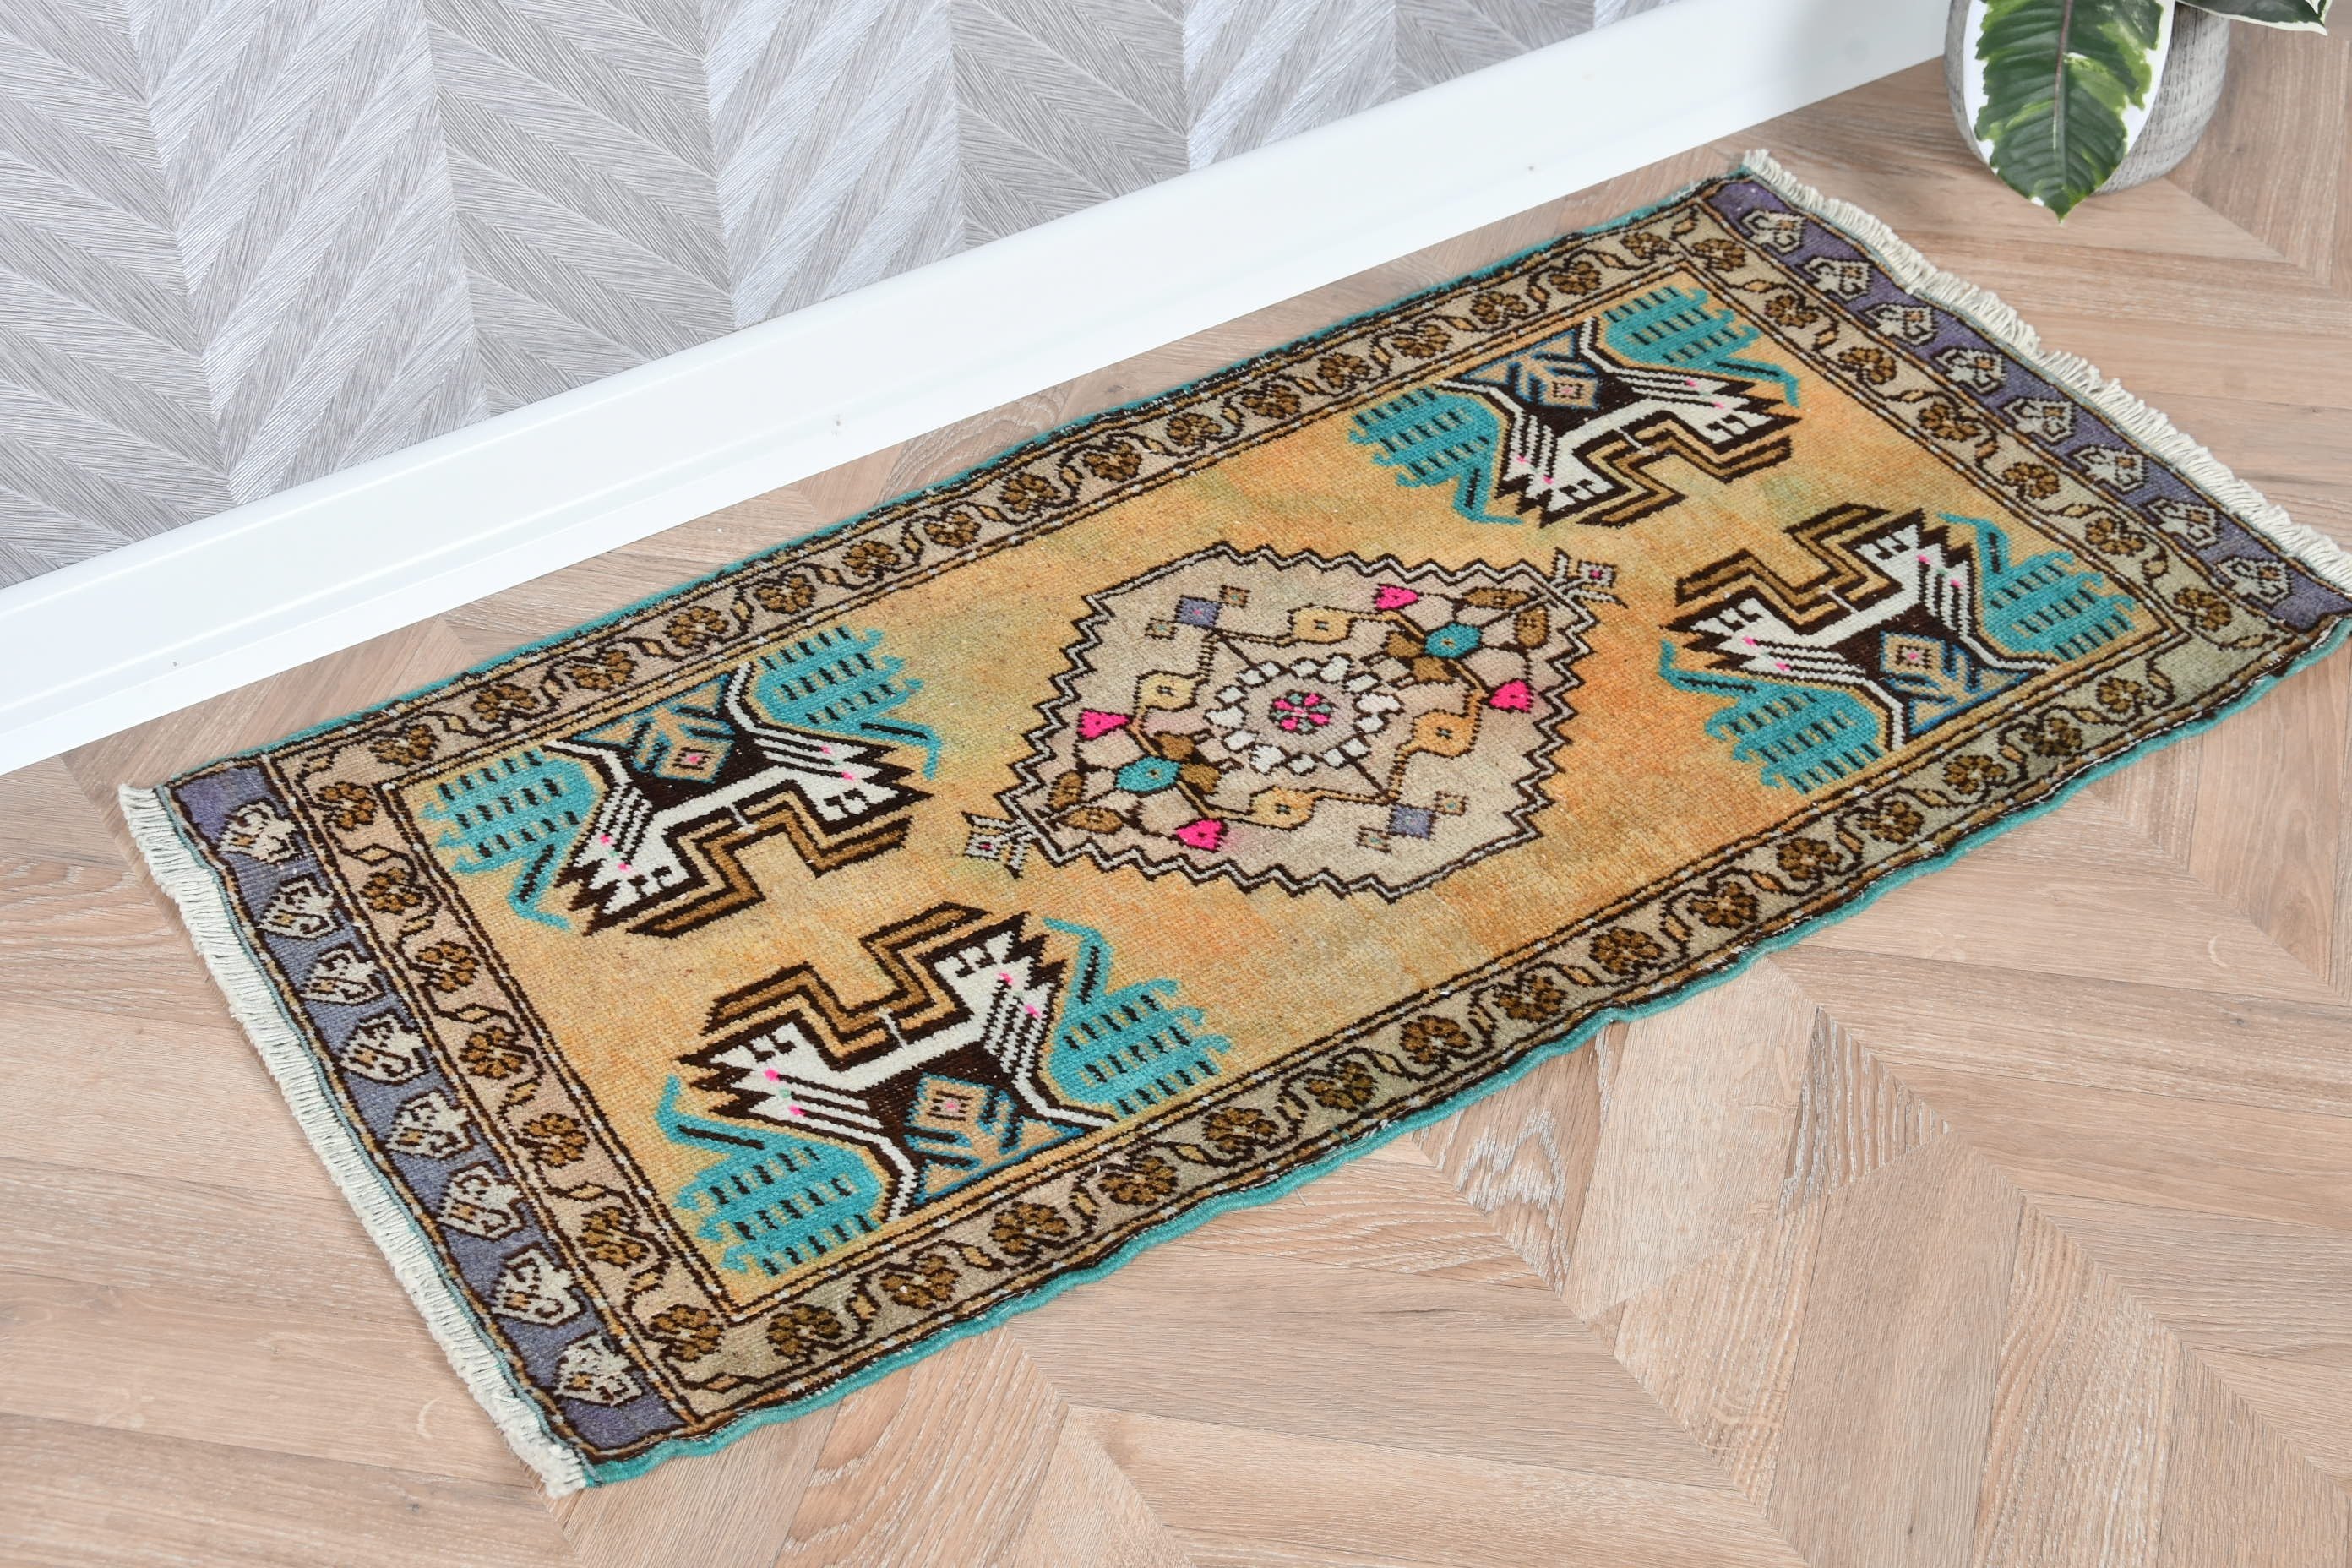 Vintage Rug, Rugs for Bath, Home Decor Rugs, 1.8x3 ft Small Rug, Turkish Rug, Wall Hanging Rug, Entry Rugs, Blue Floor Rug